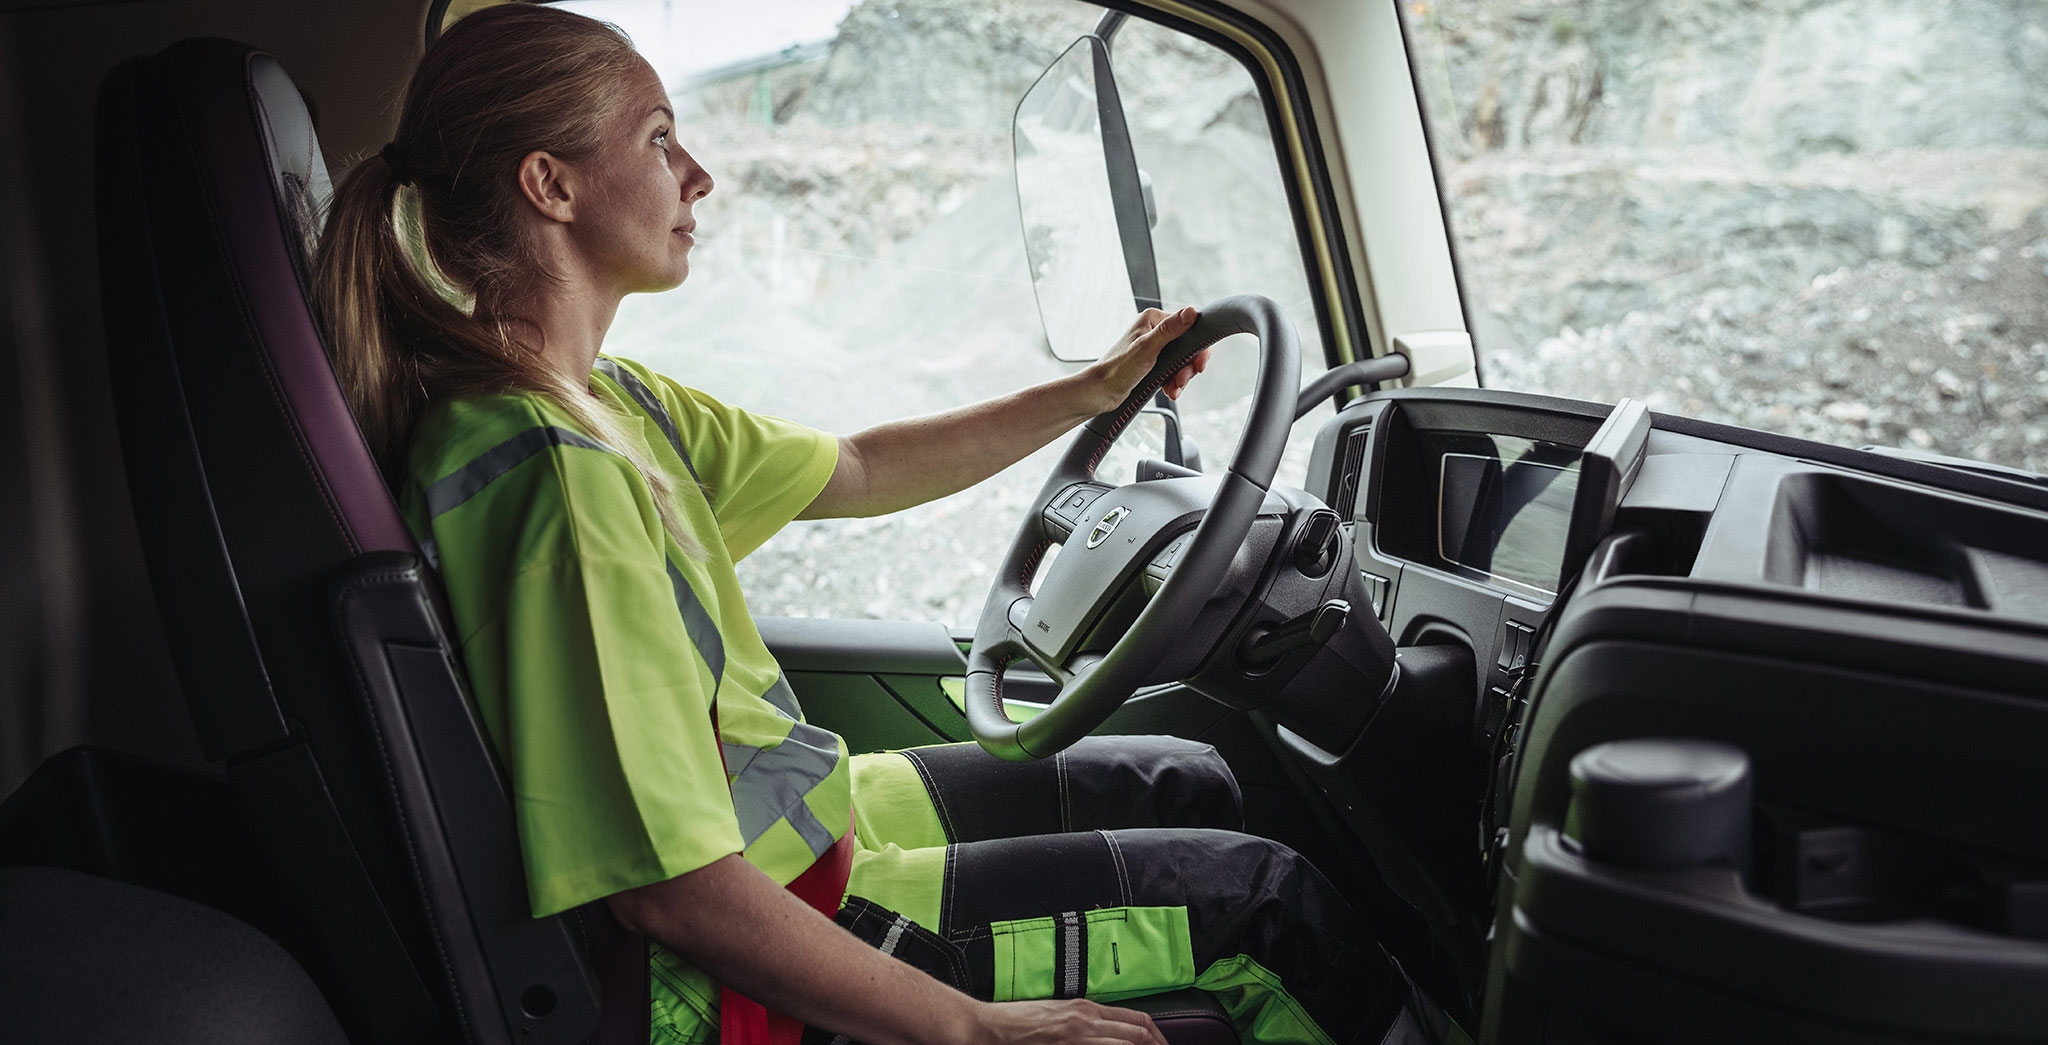 Trucking Essentials: Top 10 Things Every Truck Driver Needs